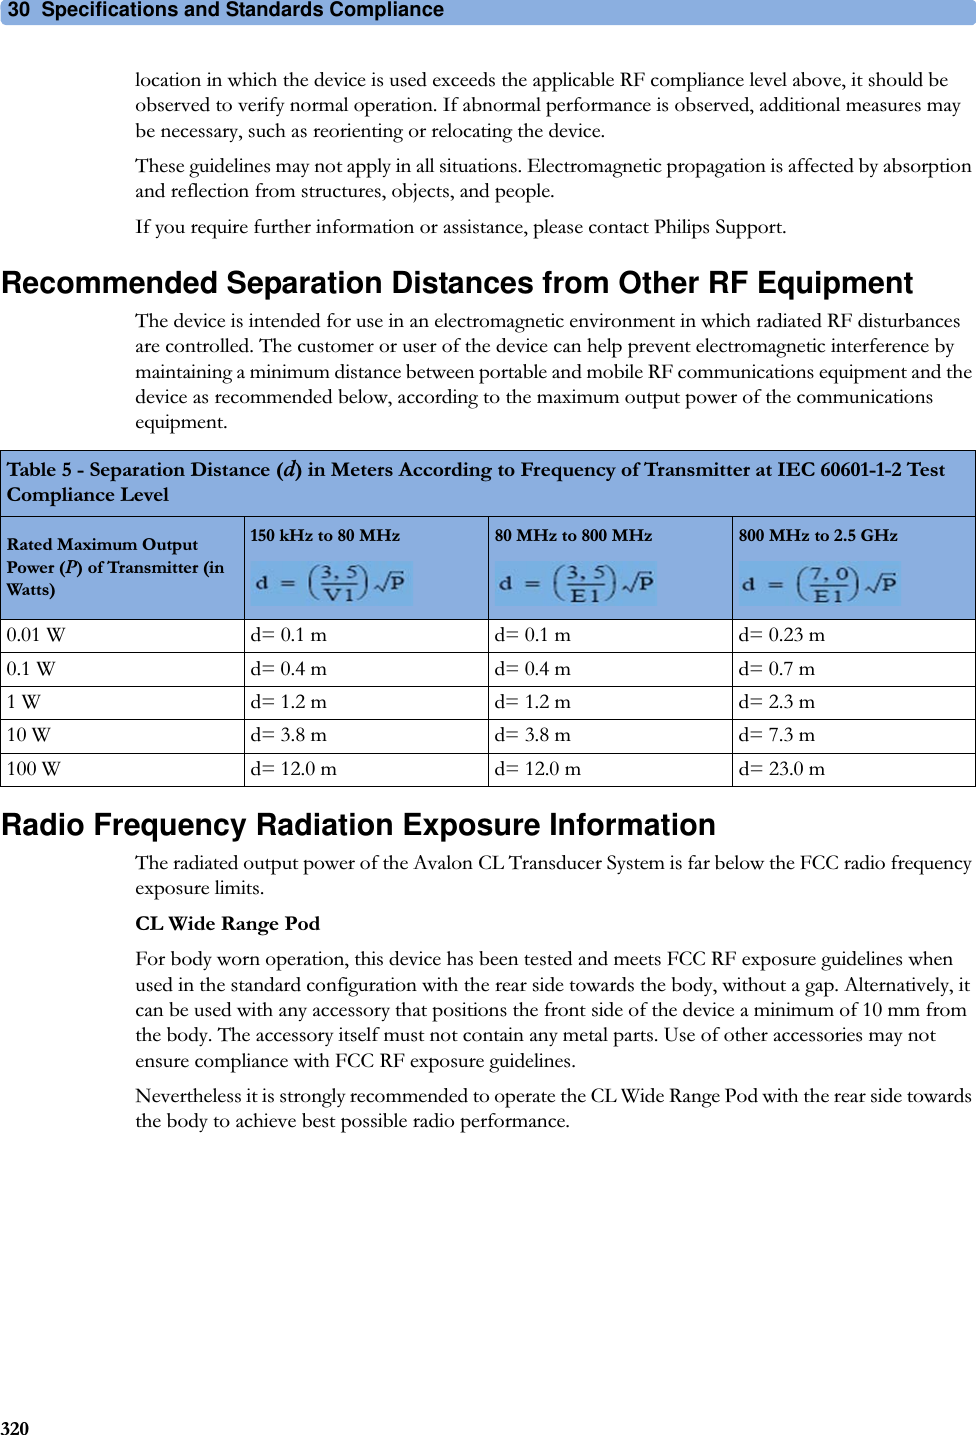 30  Specifications and Standards Compliance320location in which the device is used exceeds the applicable RF compliance level above, it should be observed to verify normal operation. If abnormal performance is observed, additional measures may be necessary, such as reorienting or relocating the device.These guidelines may not apply in all situations. Electromagnetic propagation is affected by absorption and reflection from structures, objects, and people.If you require further information or assistance, please contact Philips Support.Recommended Separation Distances from Other RF EquipmentThe device is intended for use in an electromagnetic environment in which radiated RF disturbances are controlled. The customer or user of the device can help prevent electromagnetic interference by maintaining a minimum distance between portable and mobile RF communications equipment and the device as recommended below, according to the maximum output power of the communications equipment.Radio Frequency Radiation Exposure InformationThe radiated output power of the Avalon CL Transducer System is far below the FCC radio frequency exposure limits.CL Wide Range PodFor body worn operation, this device has been tested and meets FCC RF exposure guidelines when used in the standard configuration with the rear side towards the body, without a gap. Alternatively, it can be used with any accessory that positions the front side of the device a minimum of 10 mm from the body. The accessory itself must not contain any metal parts. Use of other accessories may not ensure compliance with FCC RF exposure guidelines.Nevertheless it is strongly recommended to operate the CL Wide Range Pod with the rear side towards the body to achieve best possible radio performance.Table 5 - Separation Distance (d) in Meters According to Frequency of Transmitter at IEC 60601-1-2 Test Compliance LevelRated Maximum Output Power (P) of Transmitter (in Watts)150 kHz to 80 MHz 80 MHz to 800 MHz 800 MHz to 2.5 GHz0.01 W d= 0.1 m d= 0.1 m d= 0.23 m0.1 W d= 0.4 m d= 0.4 m d= 0.7 m1 W d= 1.2 m d= 1.2 m d= 2.3 m10 W d= 3.8 m d= 3.8 m d= 7.3 m100 W d= 12.0 m d= 12.0 m d= 23.0 m